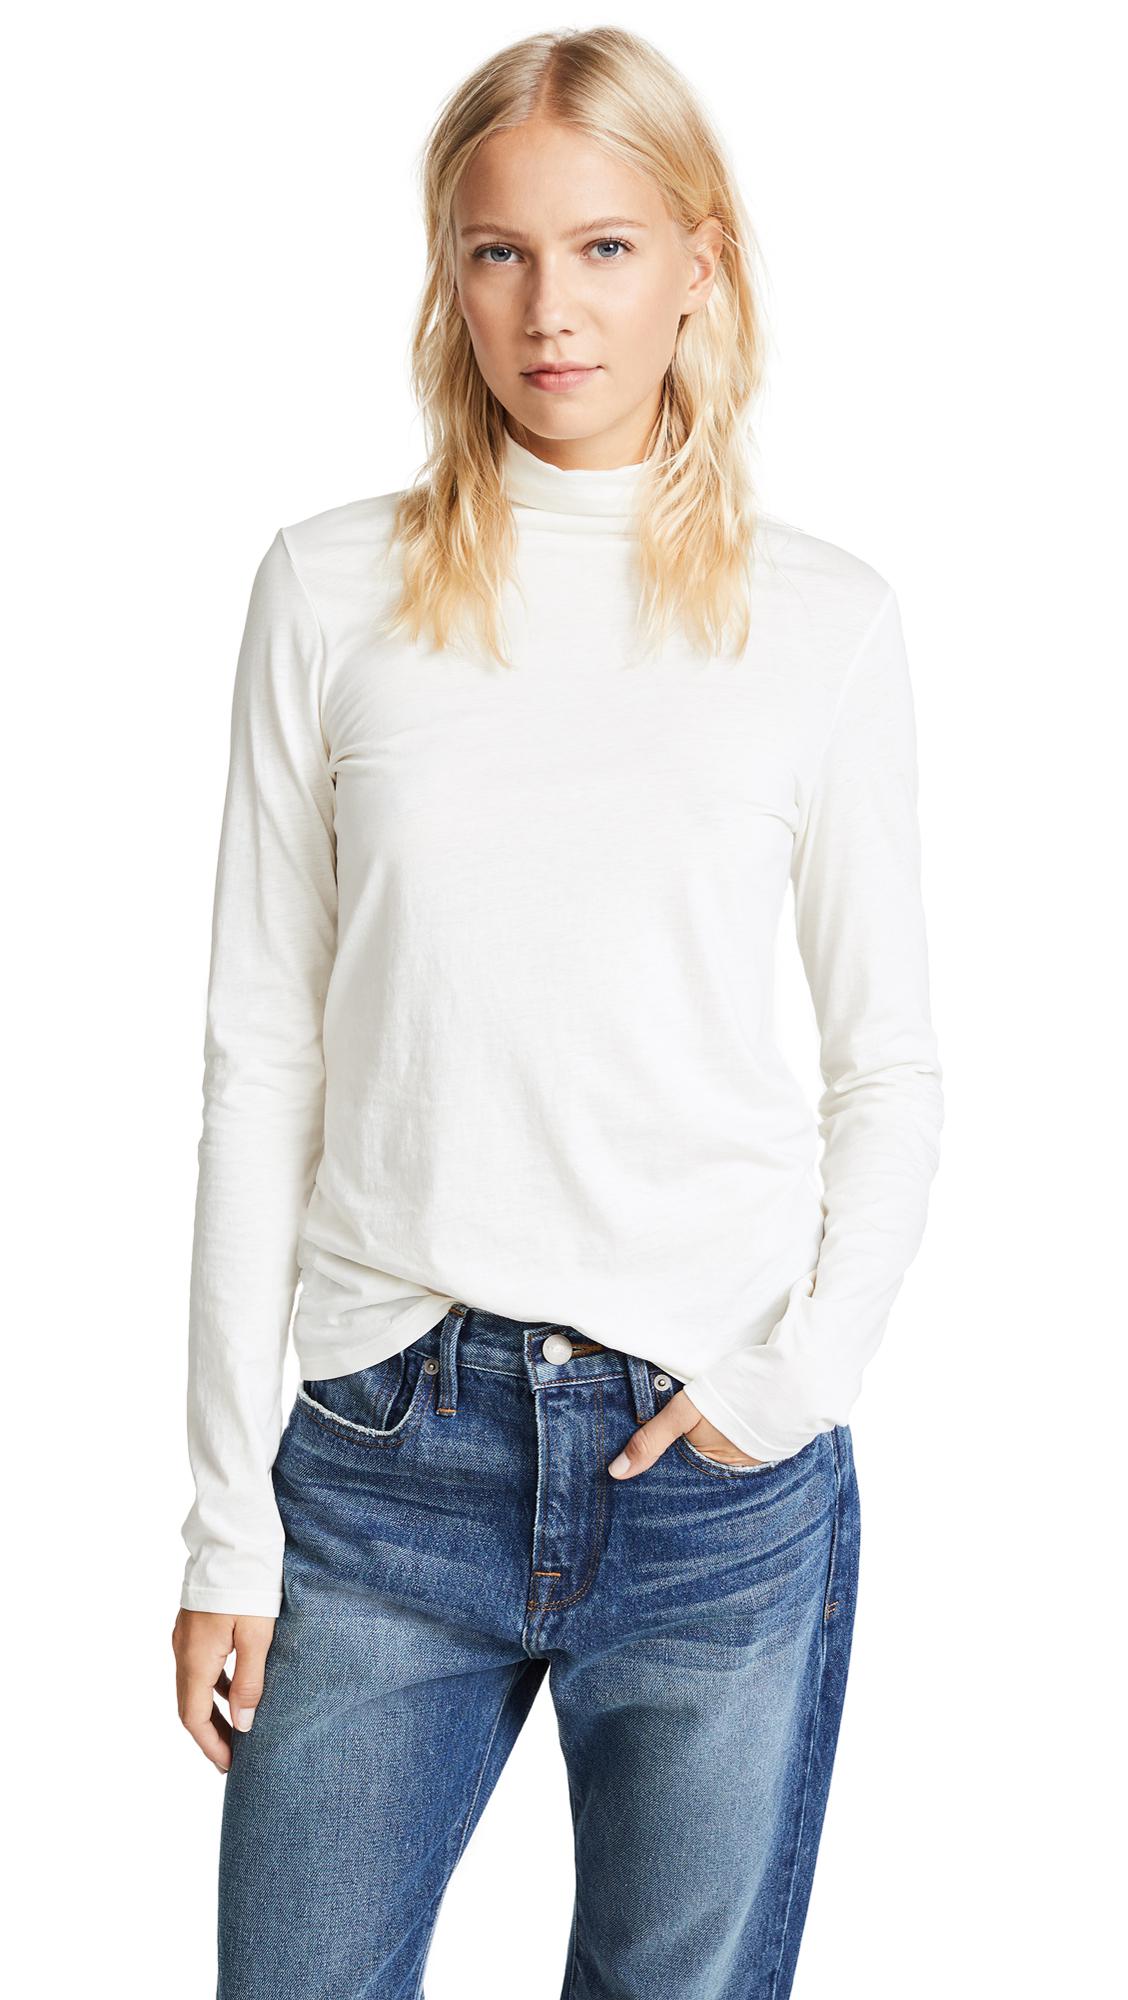 Lyst - Theory Basic Turtleneck in White